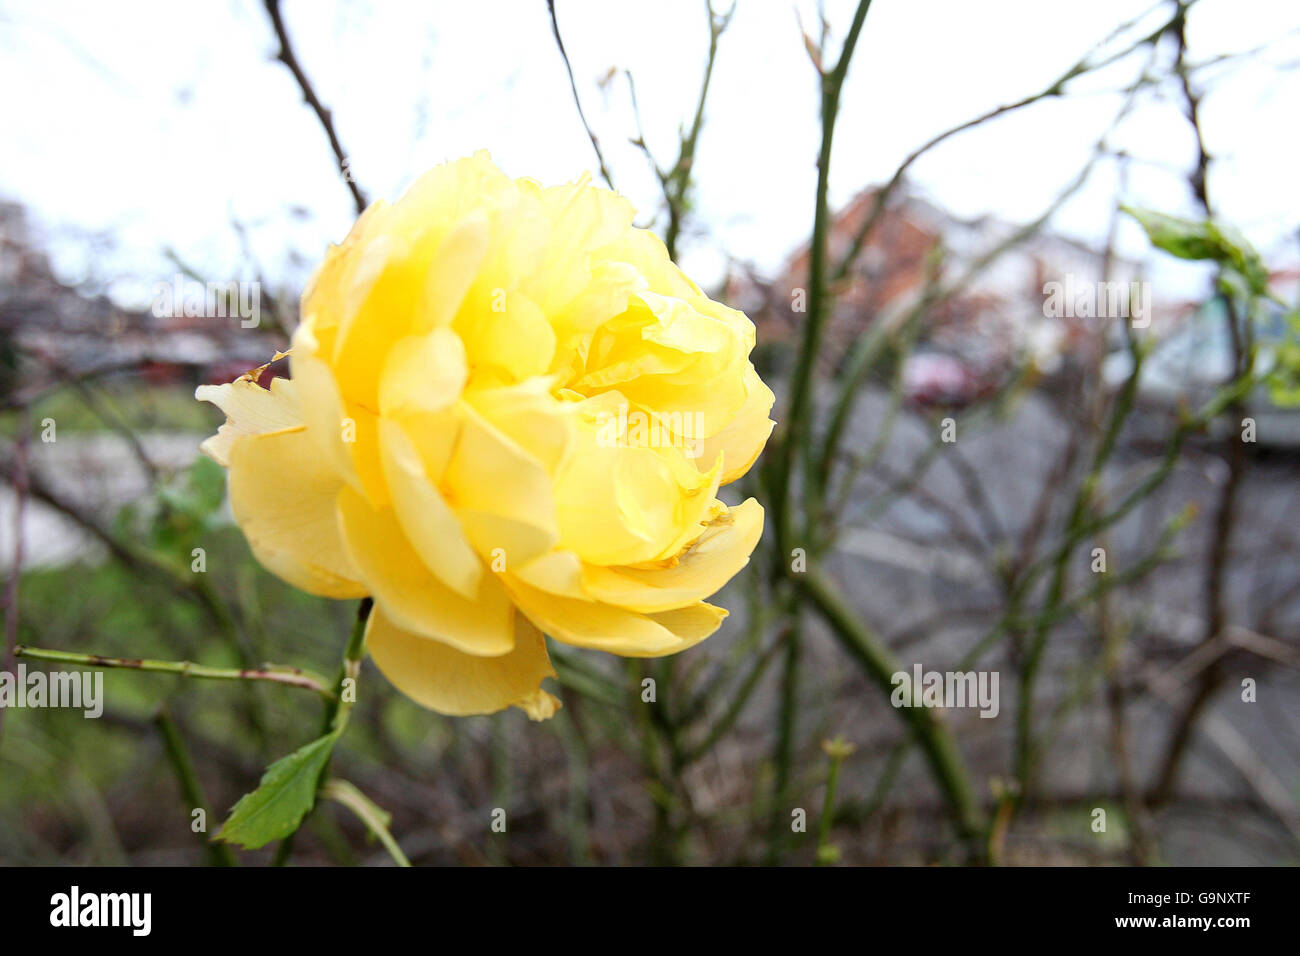 The Yellow Rose of Tyneside. STANDALONE. A yellow rose blooms in Tyneside at the end of an unusually warm January. Stock Photo